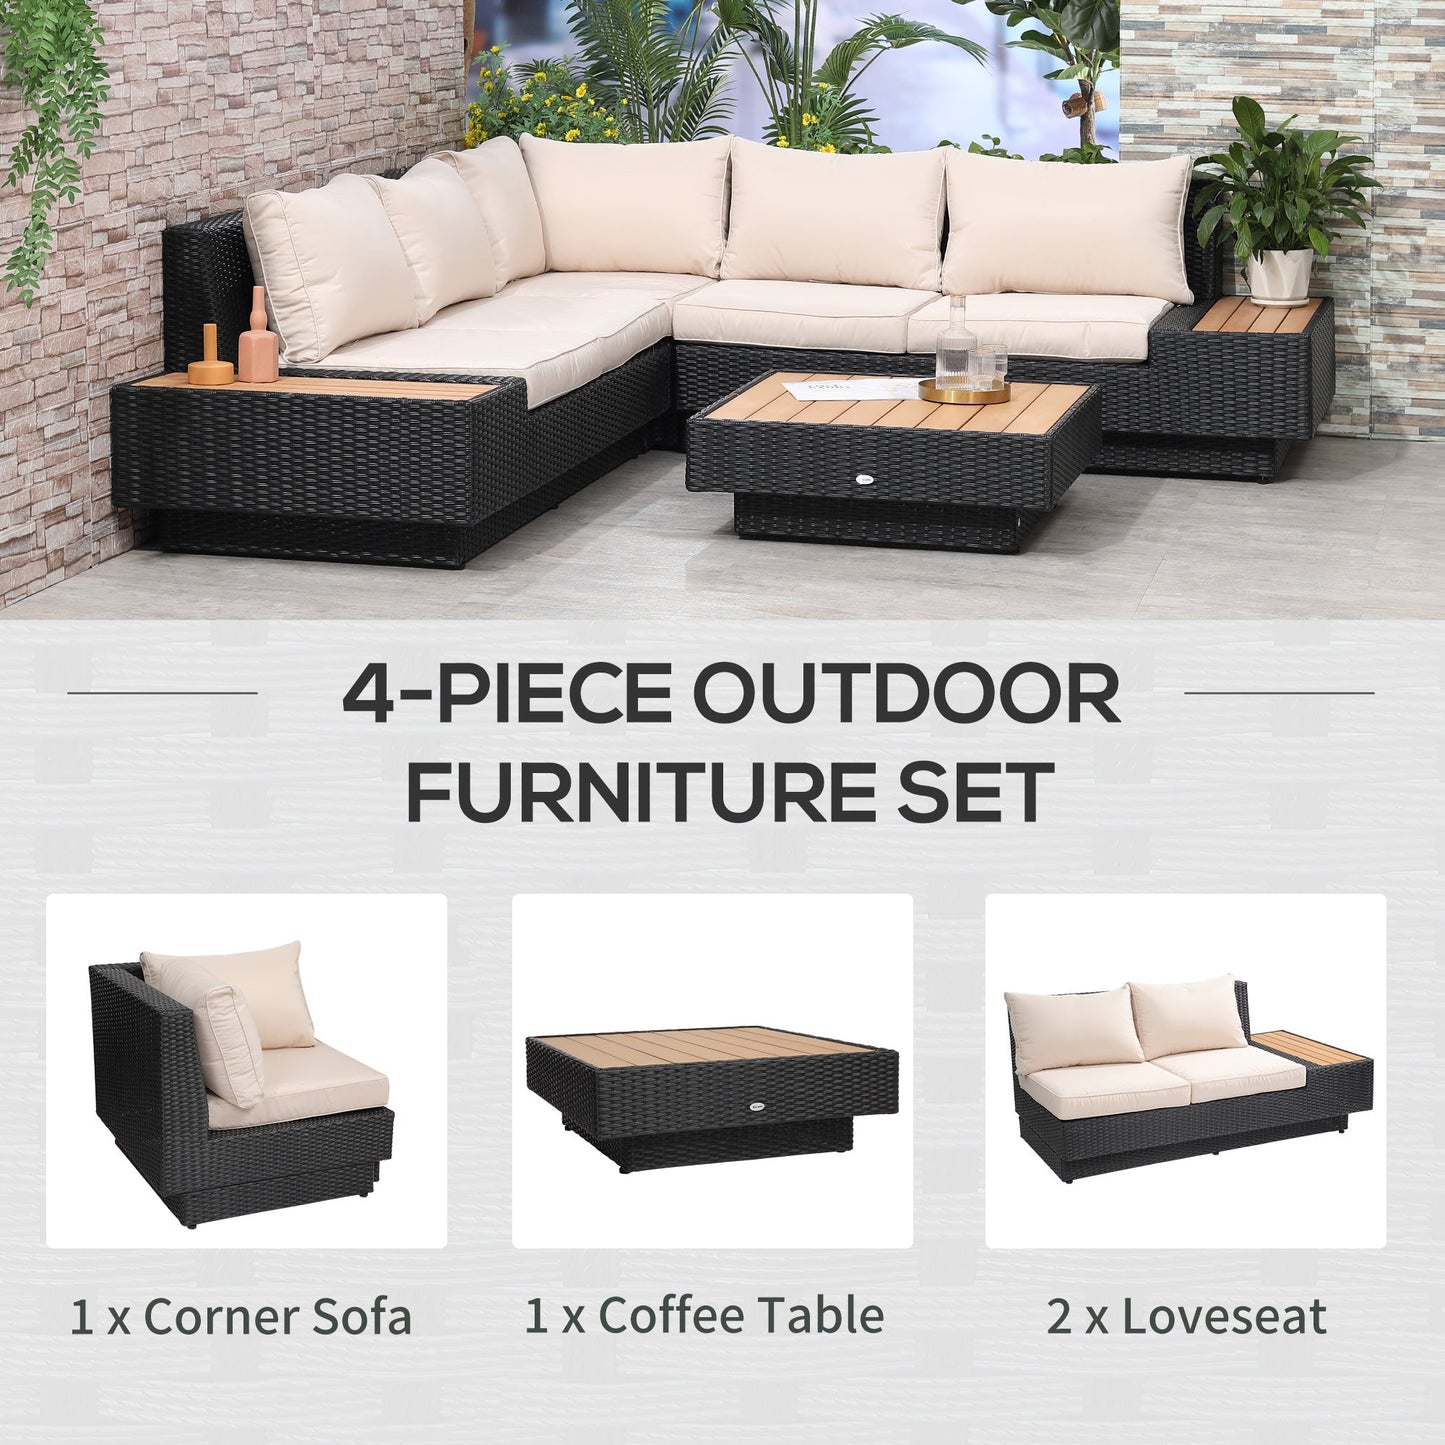 Outsunny 5-Seater Rattan Garden Furniture Outdoor Sectional Corner Sofa and Coffee Table Set  Conservatory Wicker Weave w/ Armrest and Cushions, Black